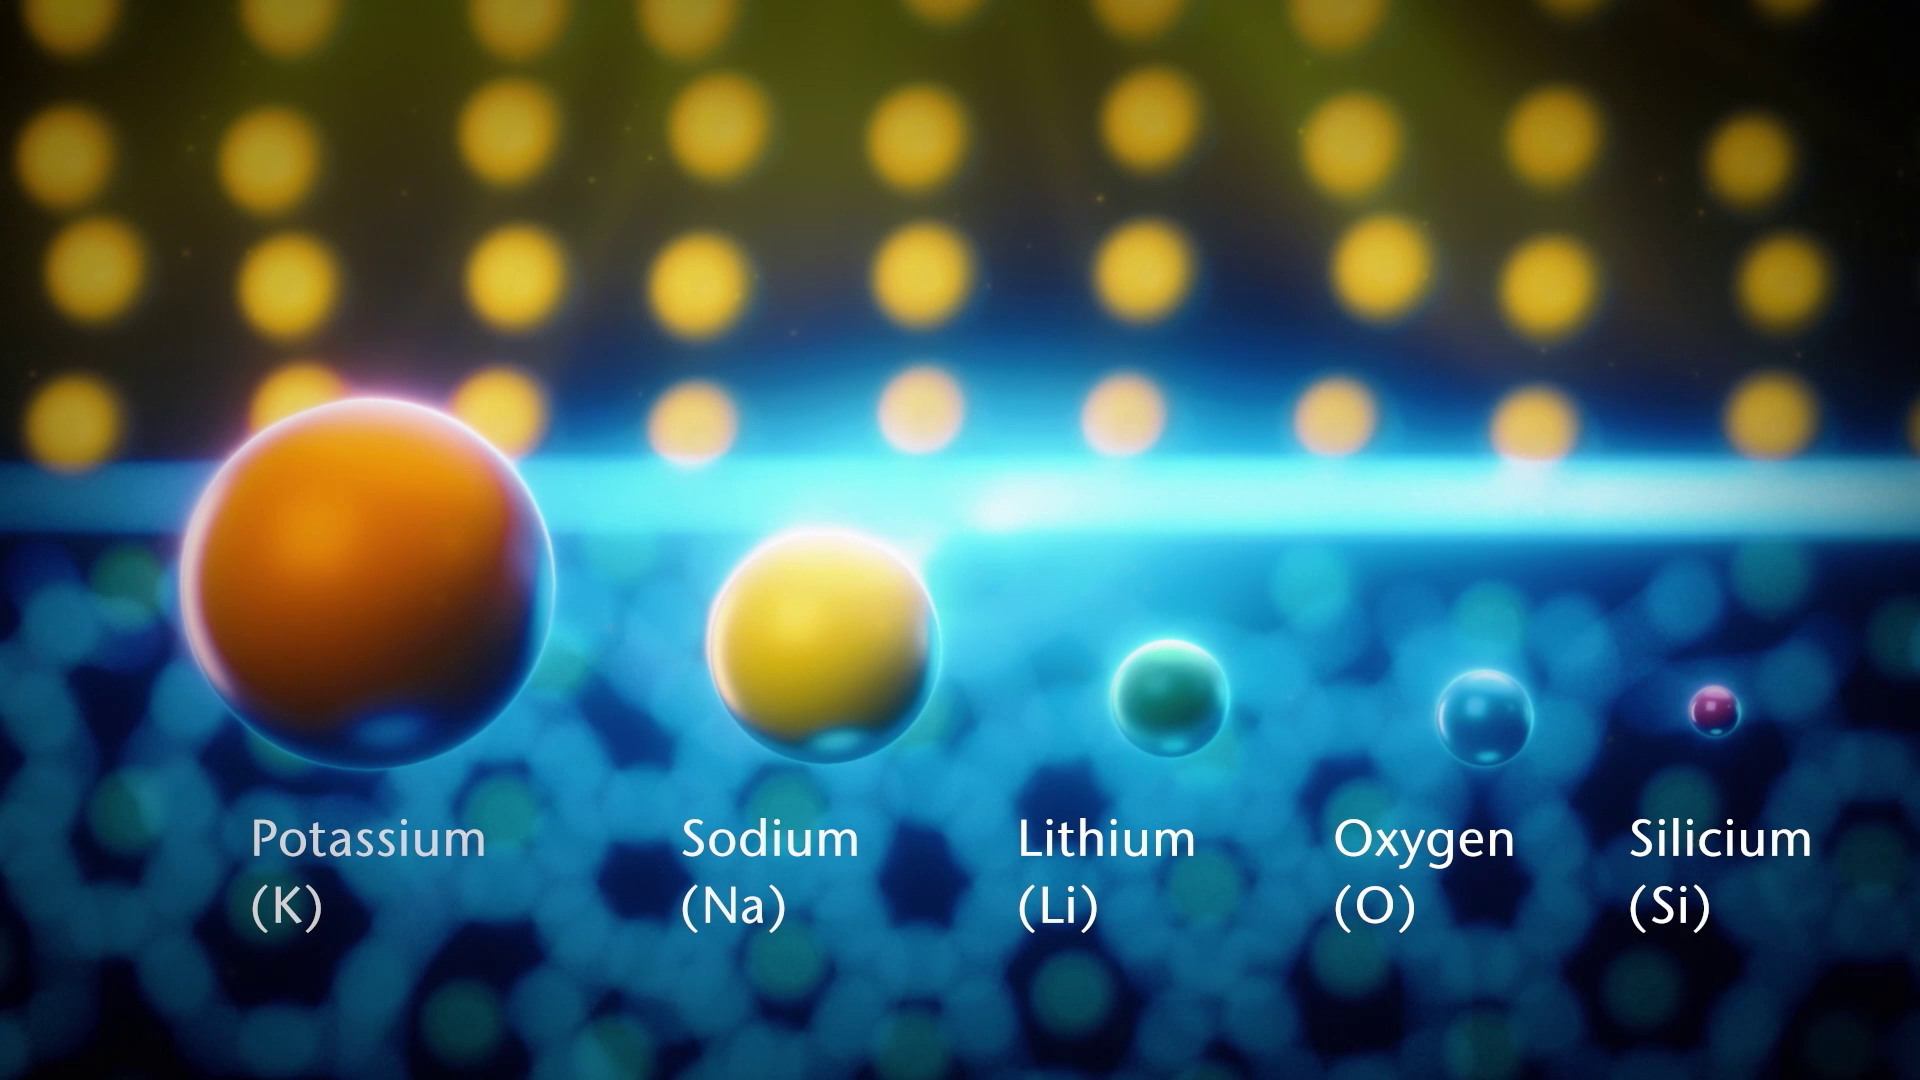 The image shows different chemical elements like potassium, sodium or lithium.